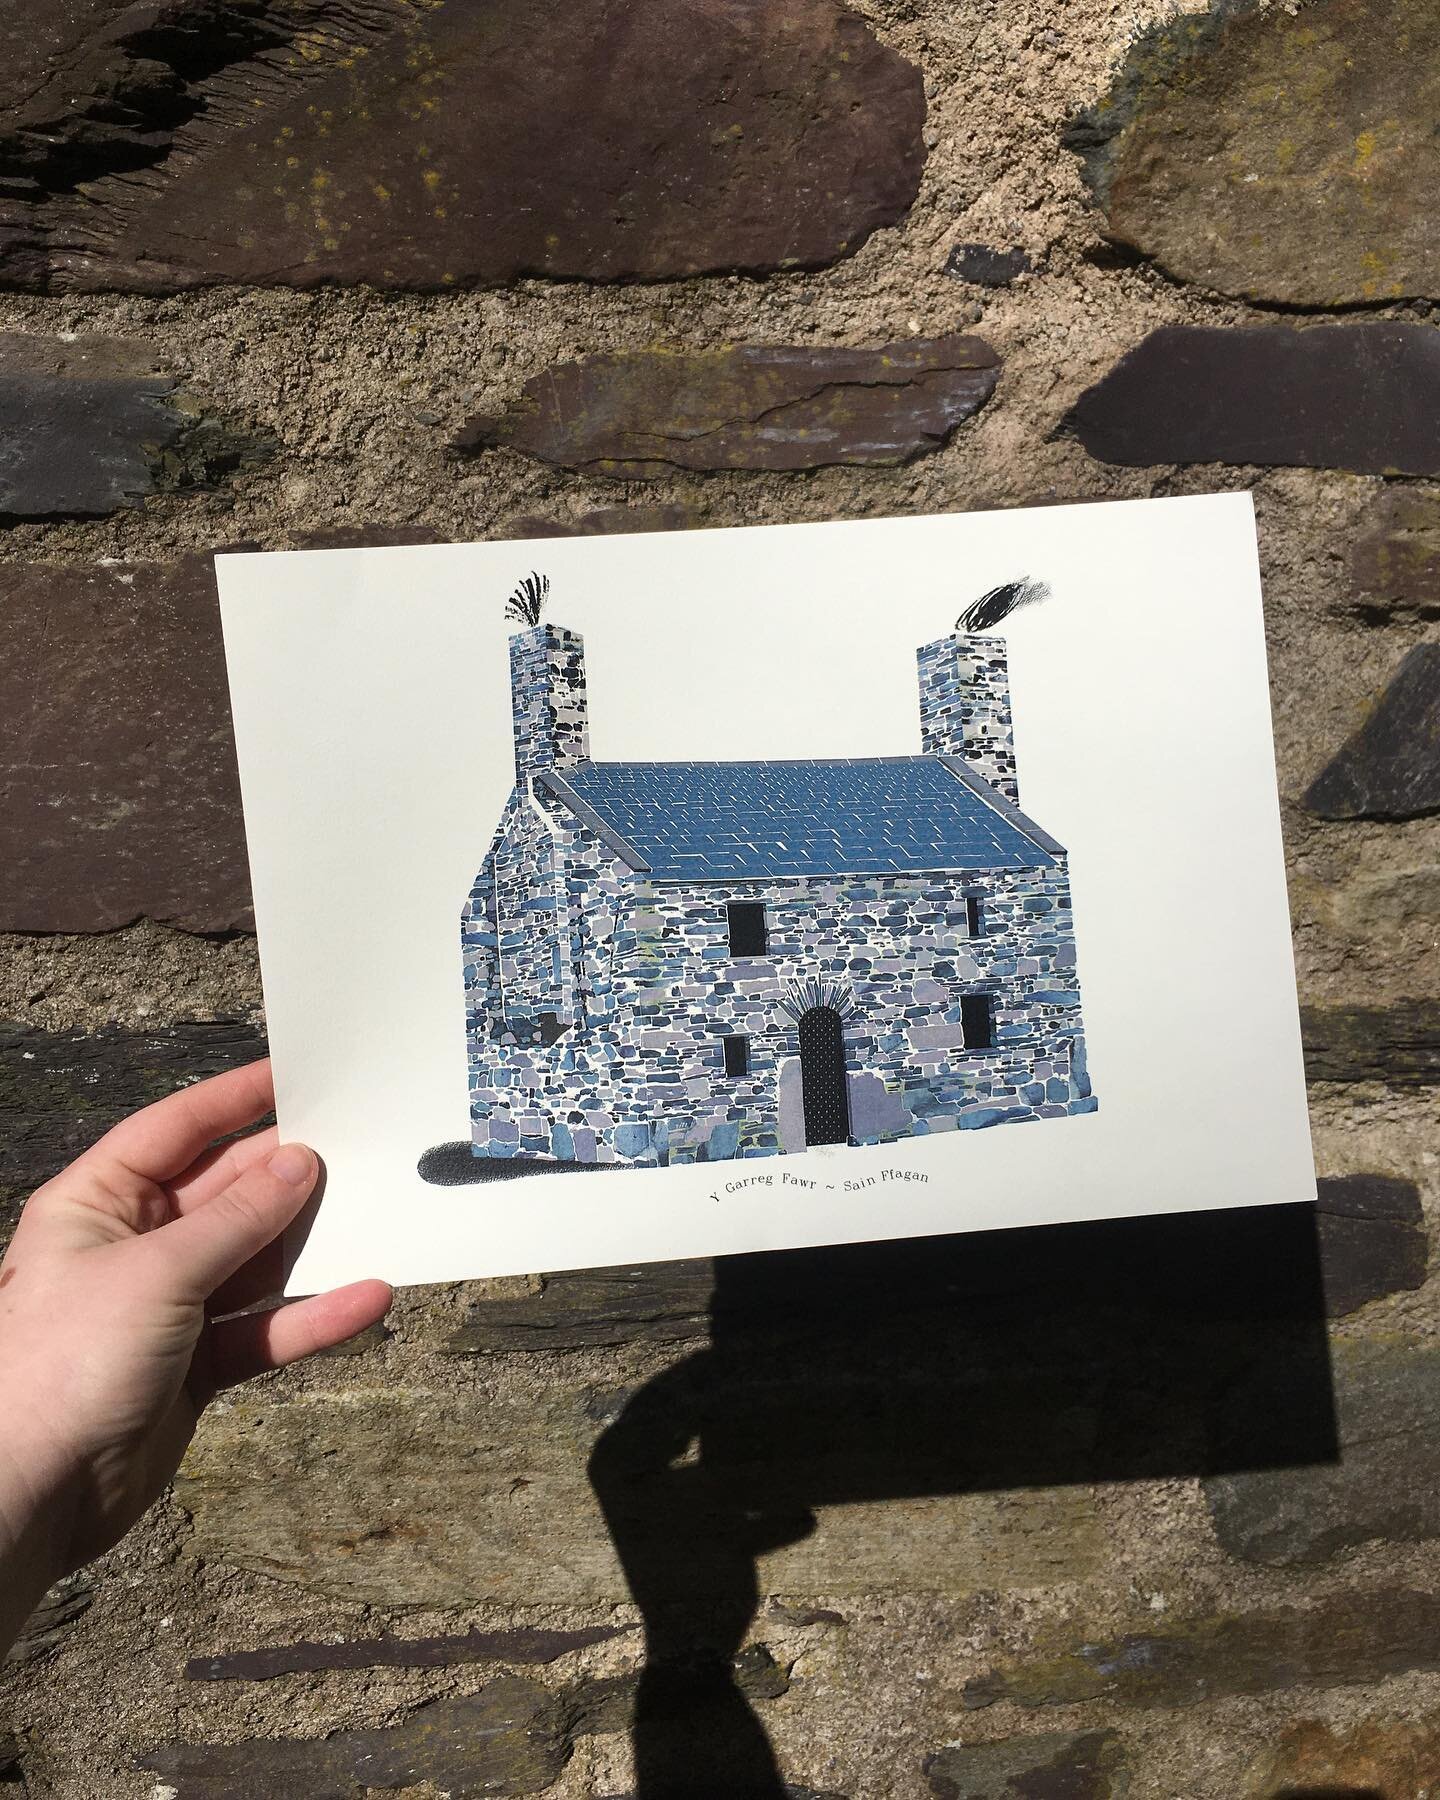 Mae fy mhrints a cardiau Sain Ffagan bellach ar werth yn siop yr amgueddfa! ~ My prints and cards featuring St Fagans buildings are now available at the museum&rsquo;s shop. Exciting!